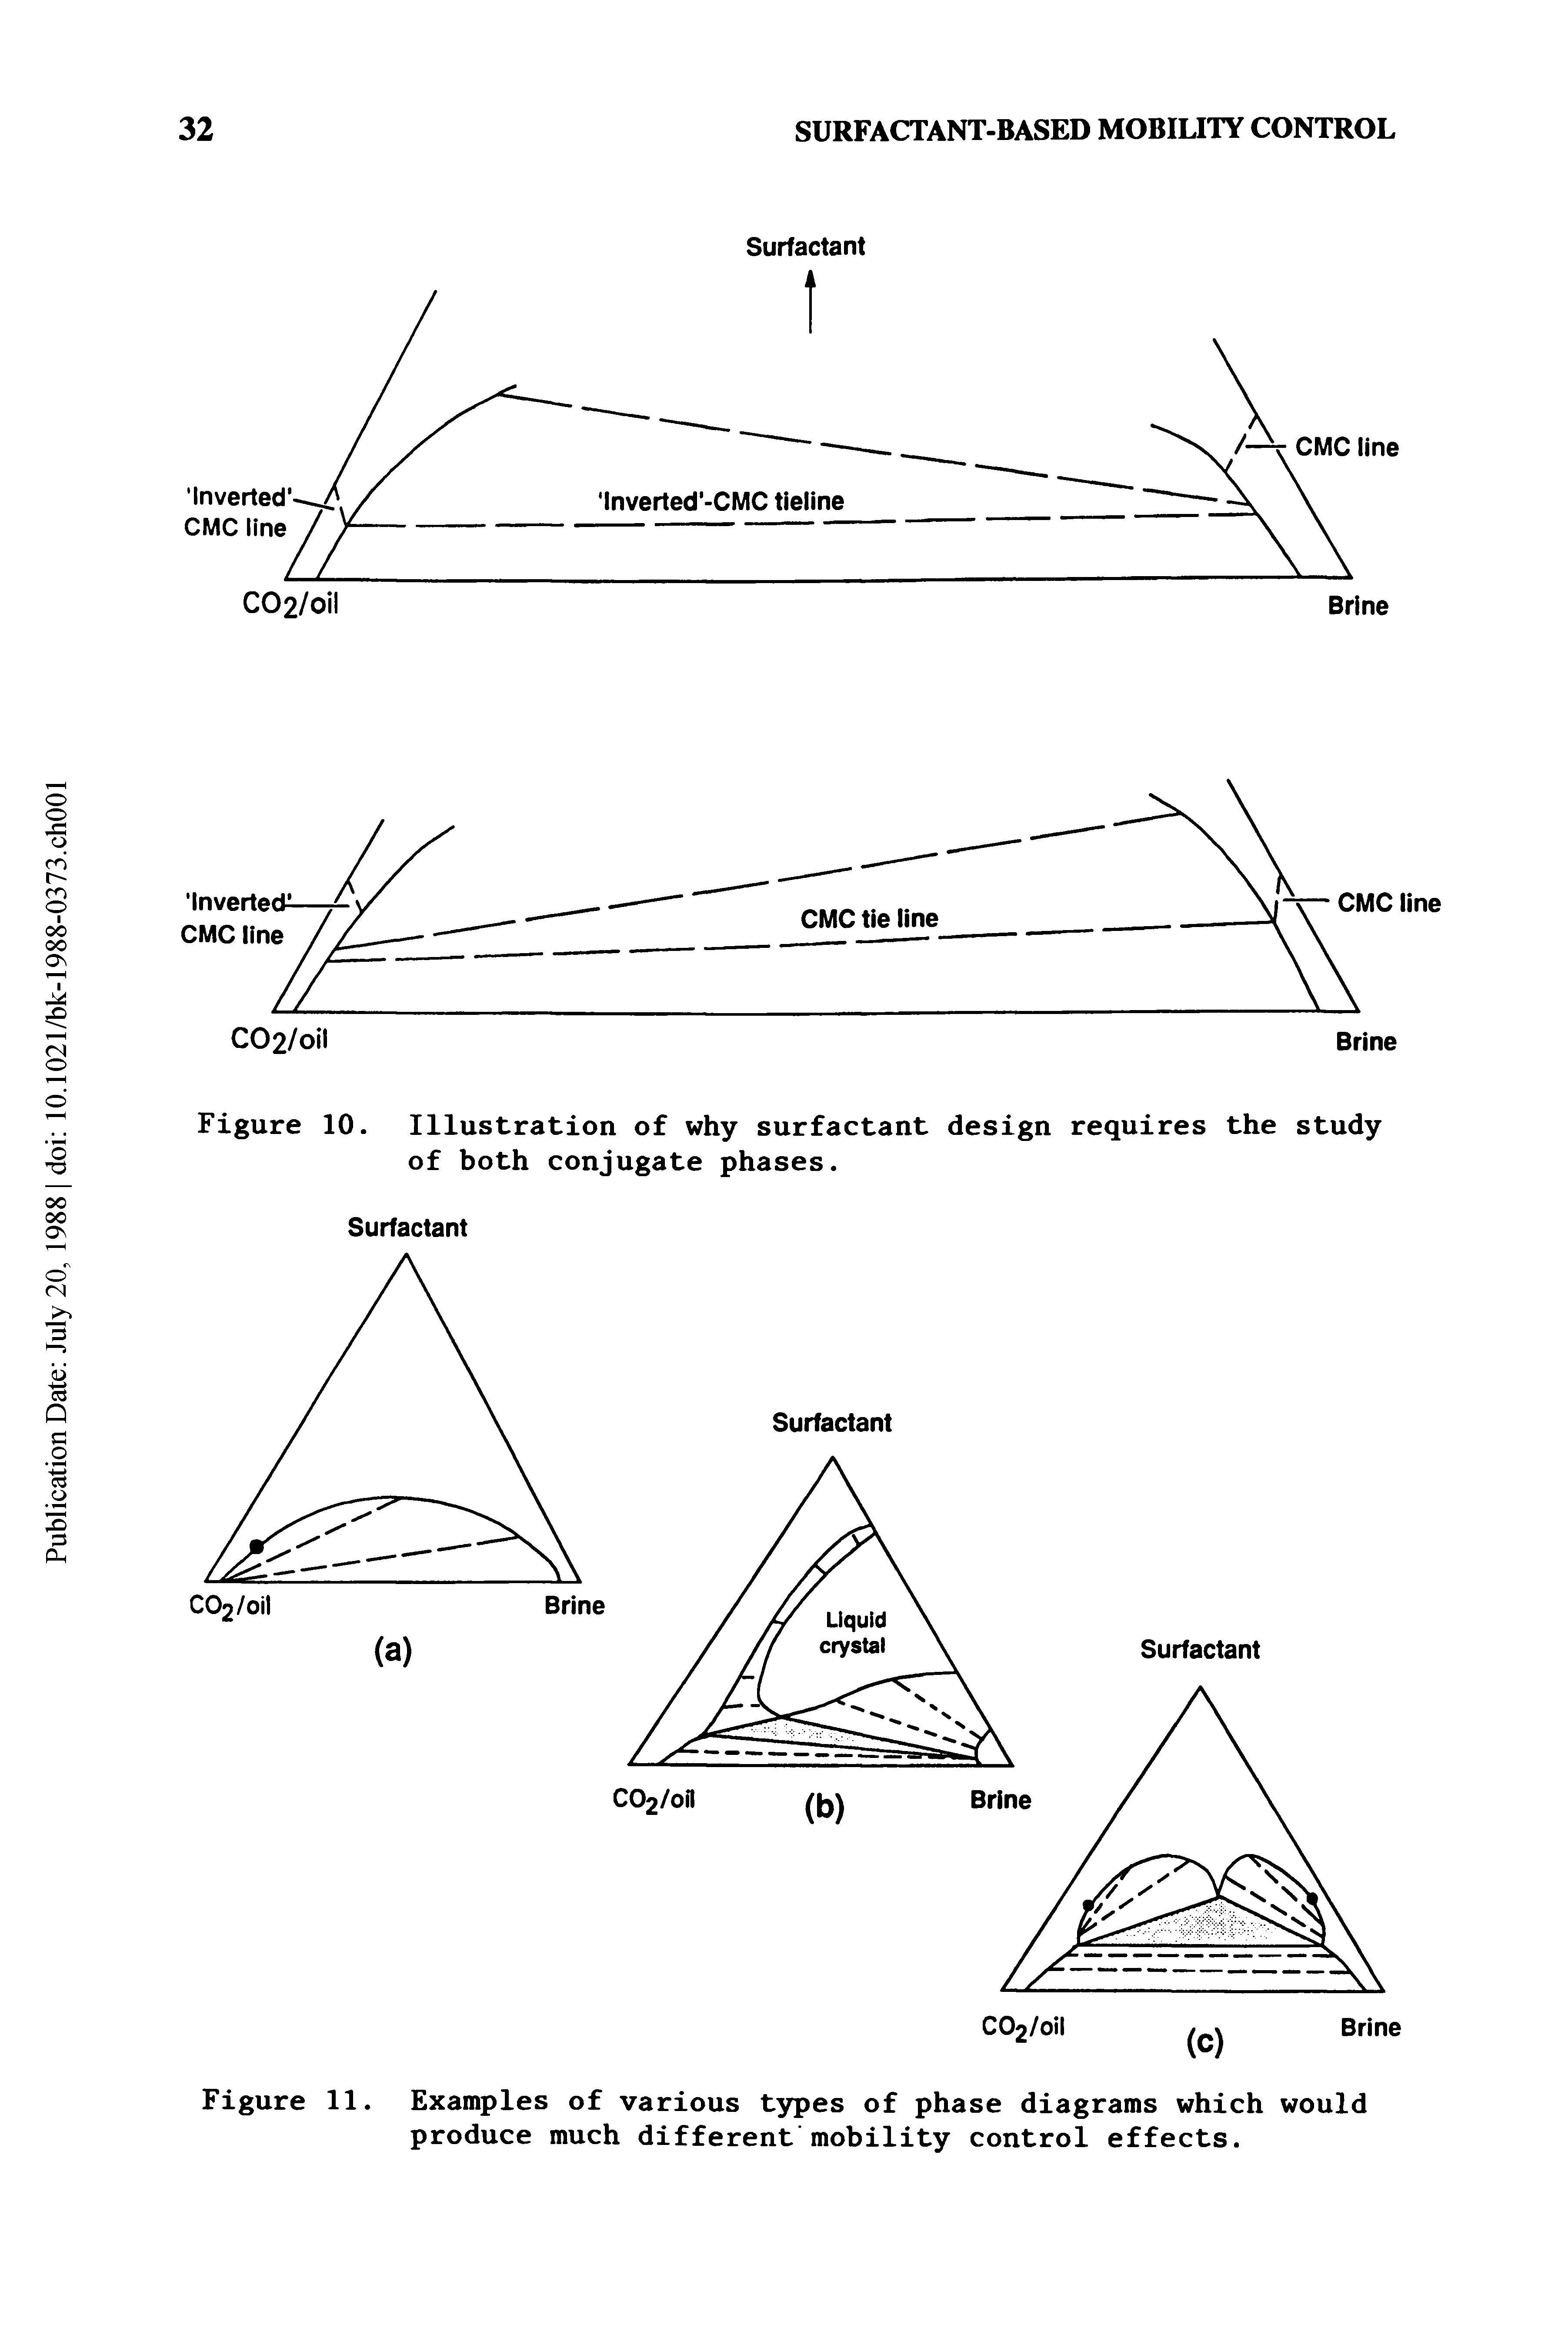 Figure 10. Illustration of why surfactant design requires the study of both conjugate phases.